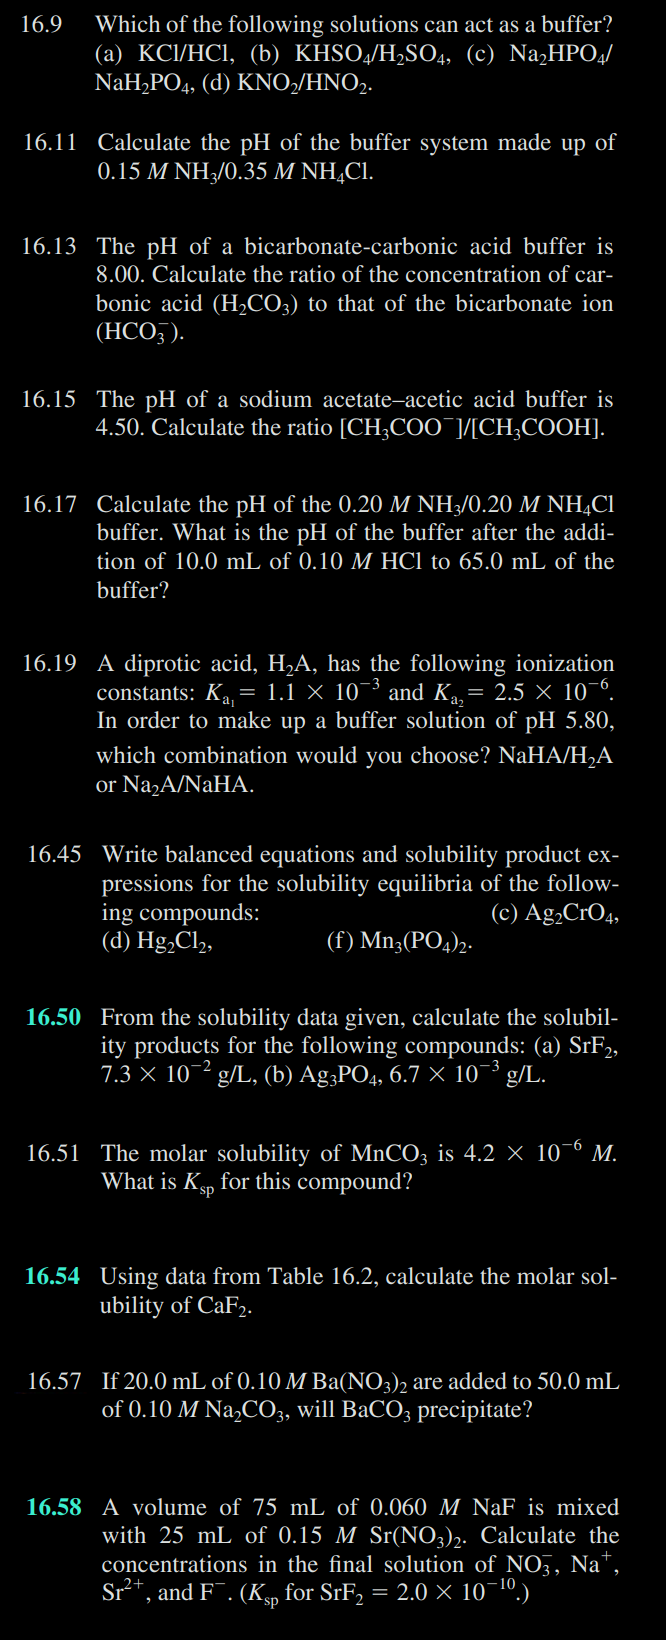 16.9
Which of the following solutions can act as a buffer?
(a) KCl/HCl, (b) KHSO4/H₂SO4, (c) Na₂HPO4/
NaH₂PO4, (d) KNO₂/HNO₂.
16.11 Calculate the pH of the buffer system made up of
0.15 M NH3/0.35 M NH4Cl.
16.13 The pH of a bicarbonate-carbonic acid buffer is
8.00. Calculate the ratio of the concentration of car-
bonic acid (H₂CO3) to that of the bicarbonate ion
(HCO3).
16.15 The pH of a sodium acetate-acetic acid buffer is
4.50. Calculate the ratio [CH3COOT]/[CH₂COOH].
16.17 Calculate the pH of the 0.20 M NH3/0.20 M NHẠCI
buffer. What is the pH of the buffer after the addi-
tion of 10.0 mL of 0.10 M HCl to 65.0 mL of the
buffer?
16.19 A diprotic acid, H₂A, has the following ionization
constants: K₁₁ = 1.1 × 10³ and K₁₂ = 2.5 × 10-6.
In order to make up a buffer solution of pH 5.80,
which combination would you choose? NaHA/H₂A
or Na₂A/NaHA.
16.45 Write balanced equations and solubility product ex-
pressions for the solubility equilibria of the follow-
ing compounds:
(d) Hg₂Cl₂,
(c) Ag₂CRO4,
(f) Mn3(PO4)2.
16.50 From the solubility data given, calculate the solubil-
ity products for the following compounds: (a) SrF2,
7.3 × 10-2 g/L, (b) Ag3PO4, 6.7 × 10¯³ g/L.
16.51 The molar solubility of MnCO3 is 4.2 × 10-6 M.
What is Ksp for this compound?
16.54 Using data from Table 16.2, calculate the molar sol-
ubility of CaF2.
16.57 If 20.0 mL of 0.10 M Ba(NO3)2 are added to 50.0 mL
of 0.10 M Na₂CO3, will BaCO3 precipitate?
16.58 A volume of 75 mL of 0.060 M NaF is mixed
with 25 mL of 0.15 M Sr(NO3)2. Calculate the
concentrations in the final solution of NO3, Na+,
Sr²+, and F¯. (Kp for SrF₂ = 2.0 × 10-¹⁰.)